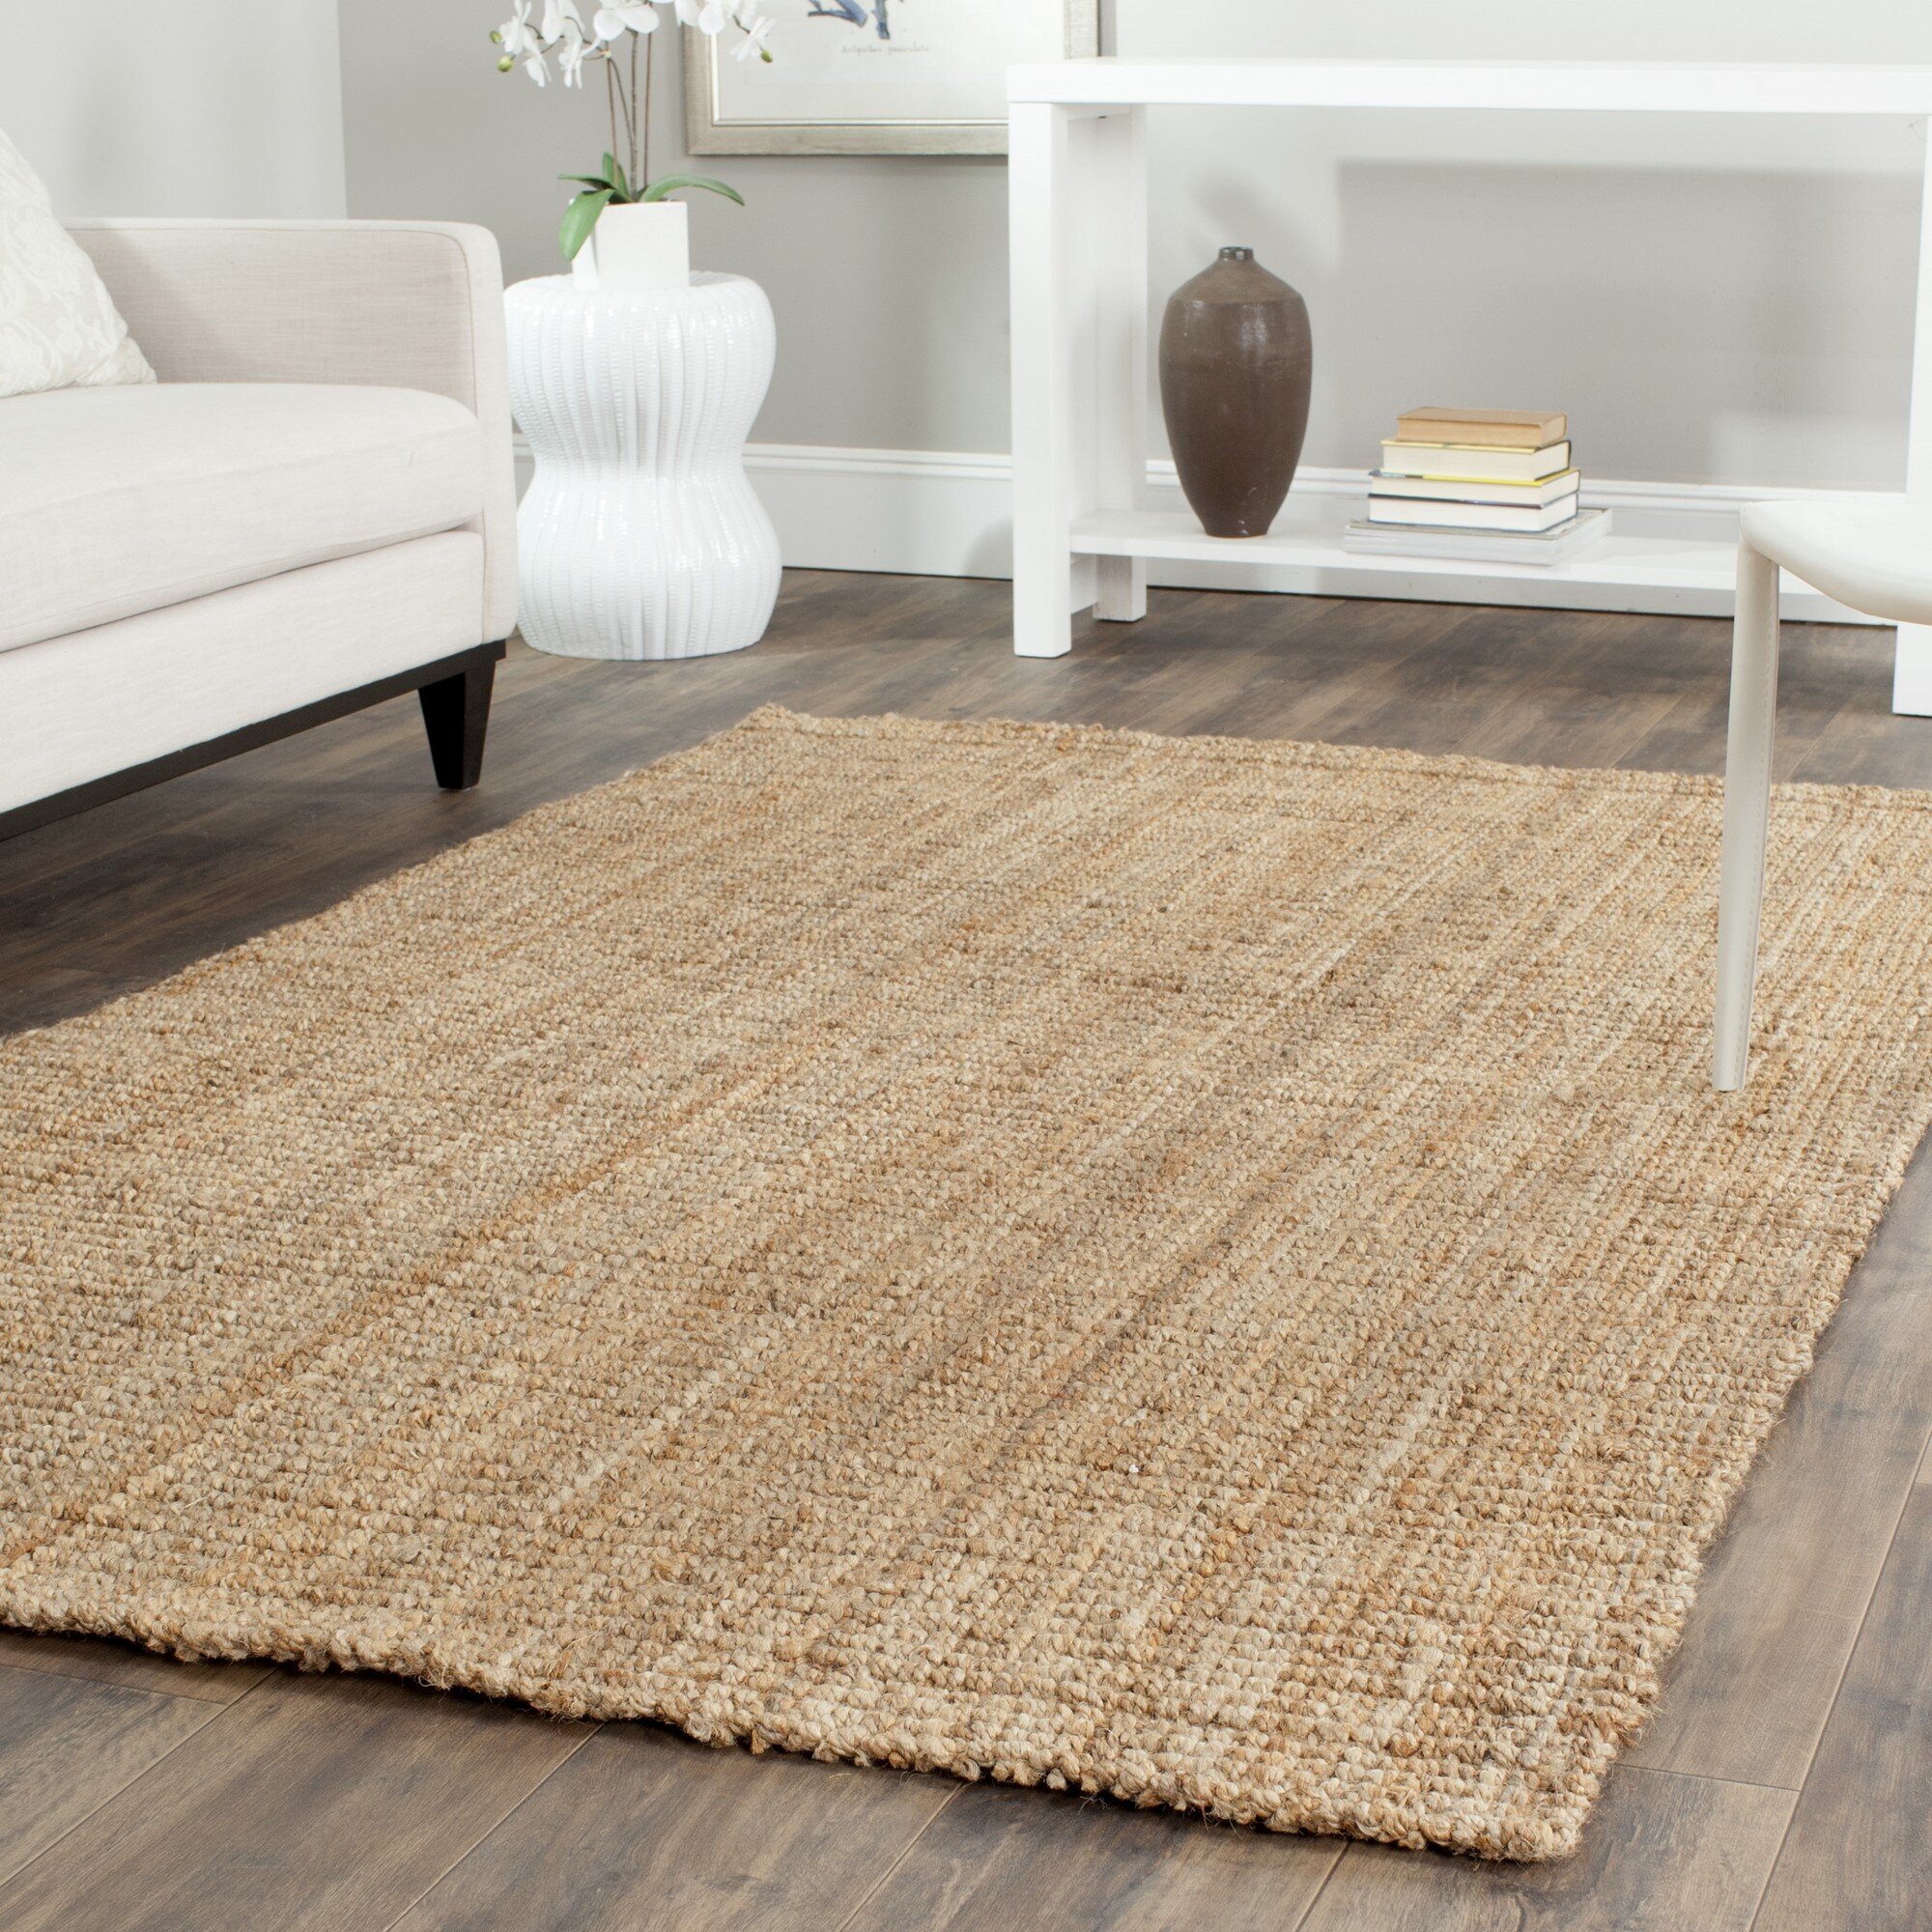 how to make a custom rug with smaller rugs